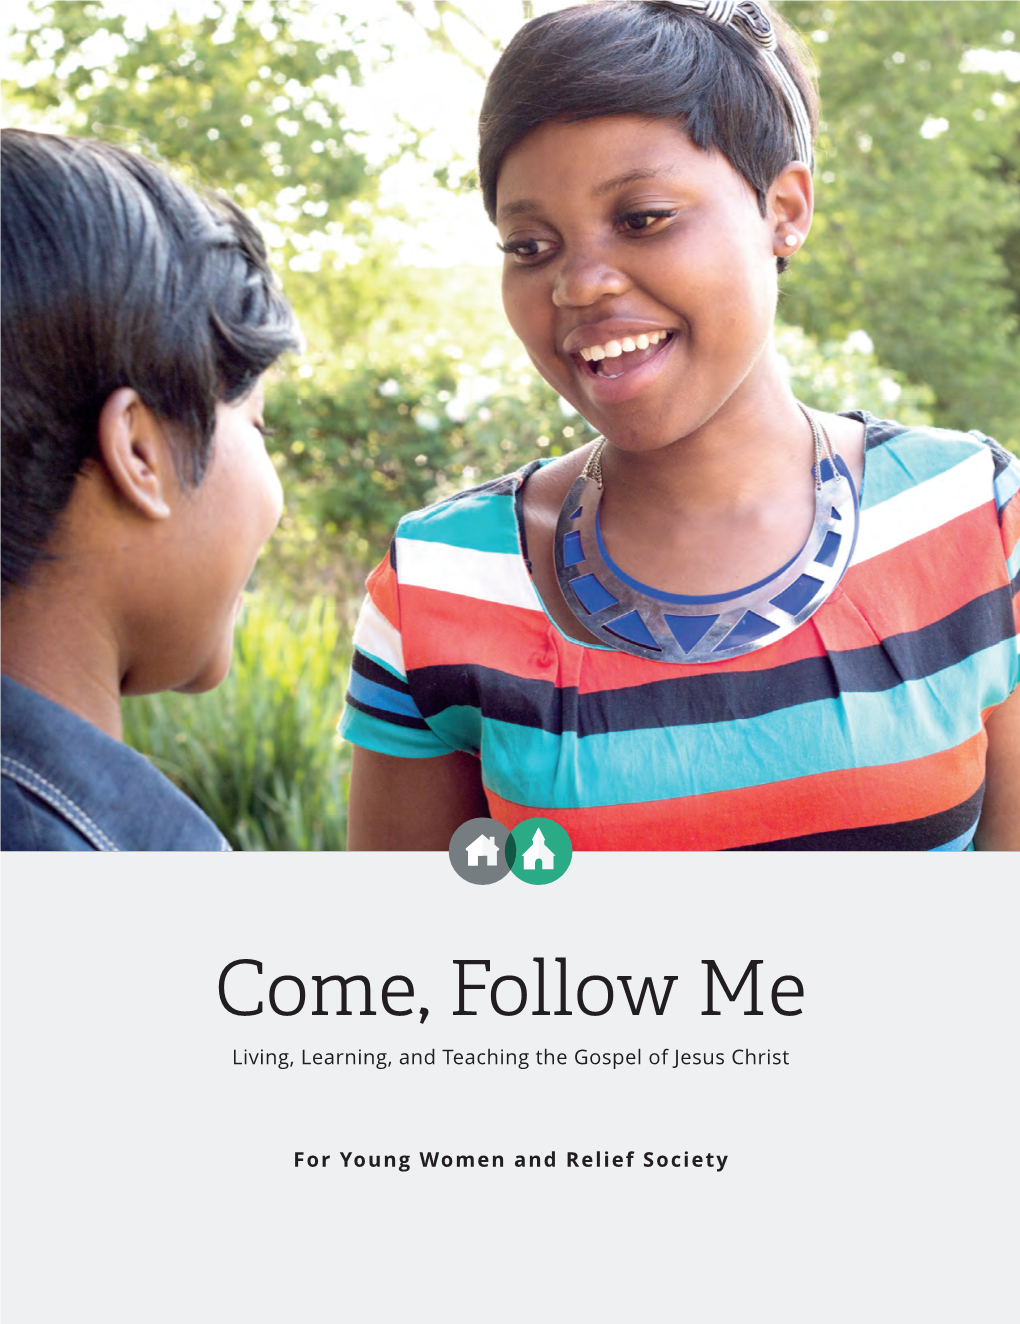 Come, Follow Me Living, Learning, and Teaching the Gospel of Jesus Christ